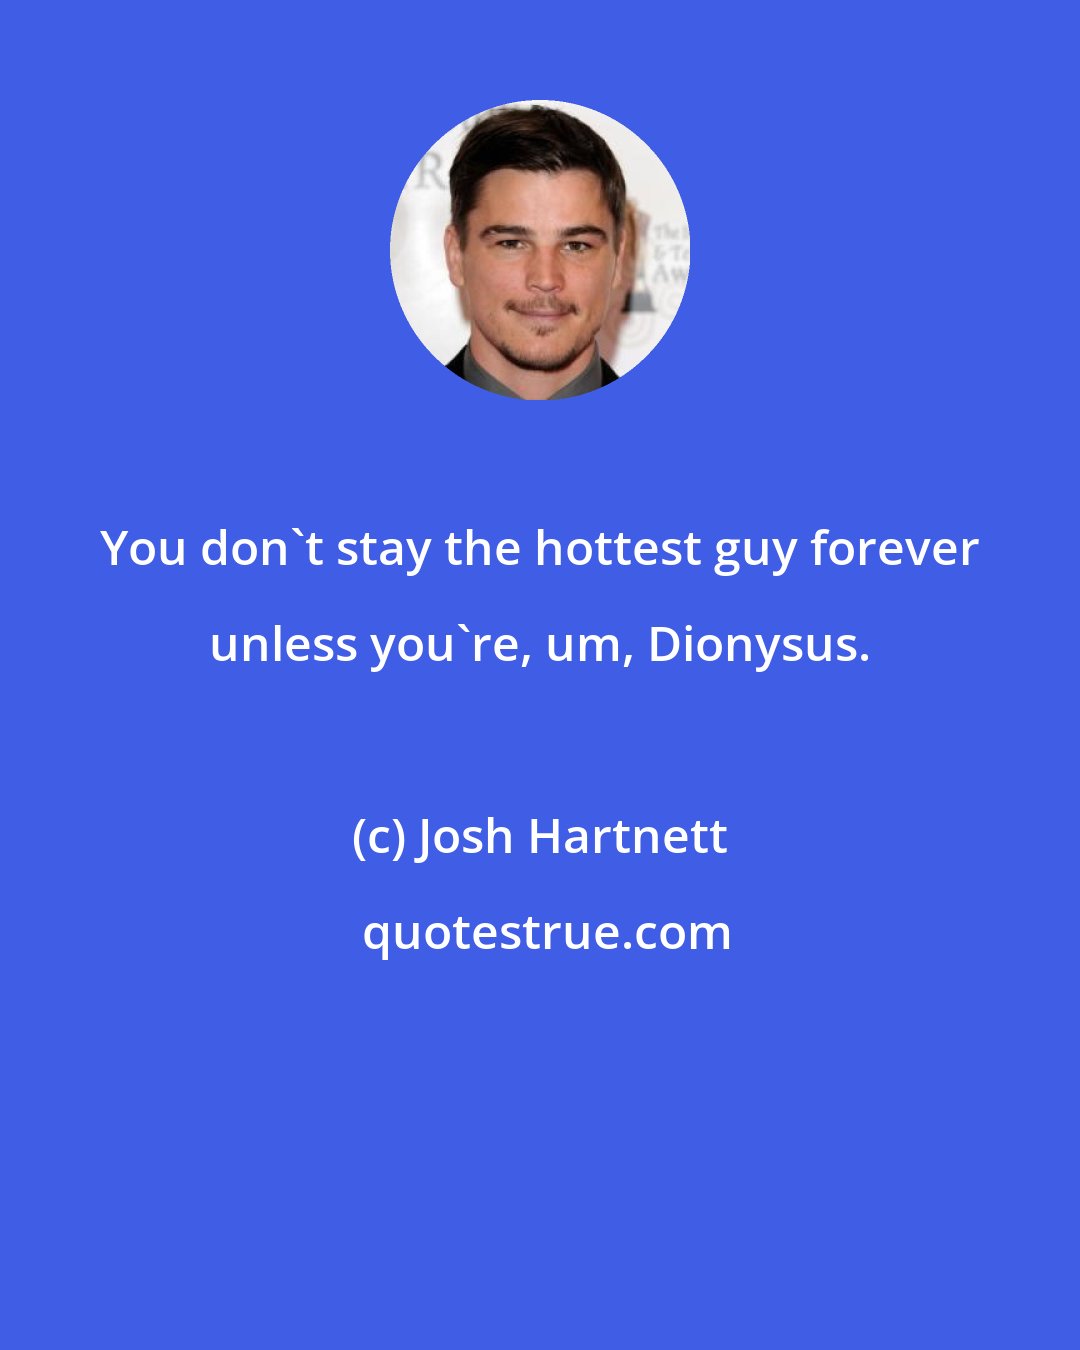 Josh Hartnett: You don't stay the hottest guy forever unless you're, um, Dionysus.